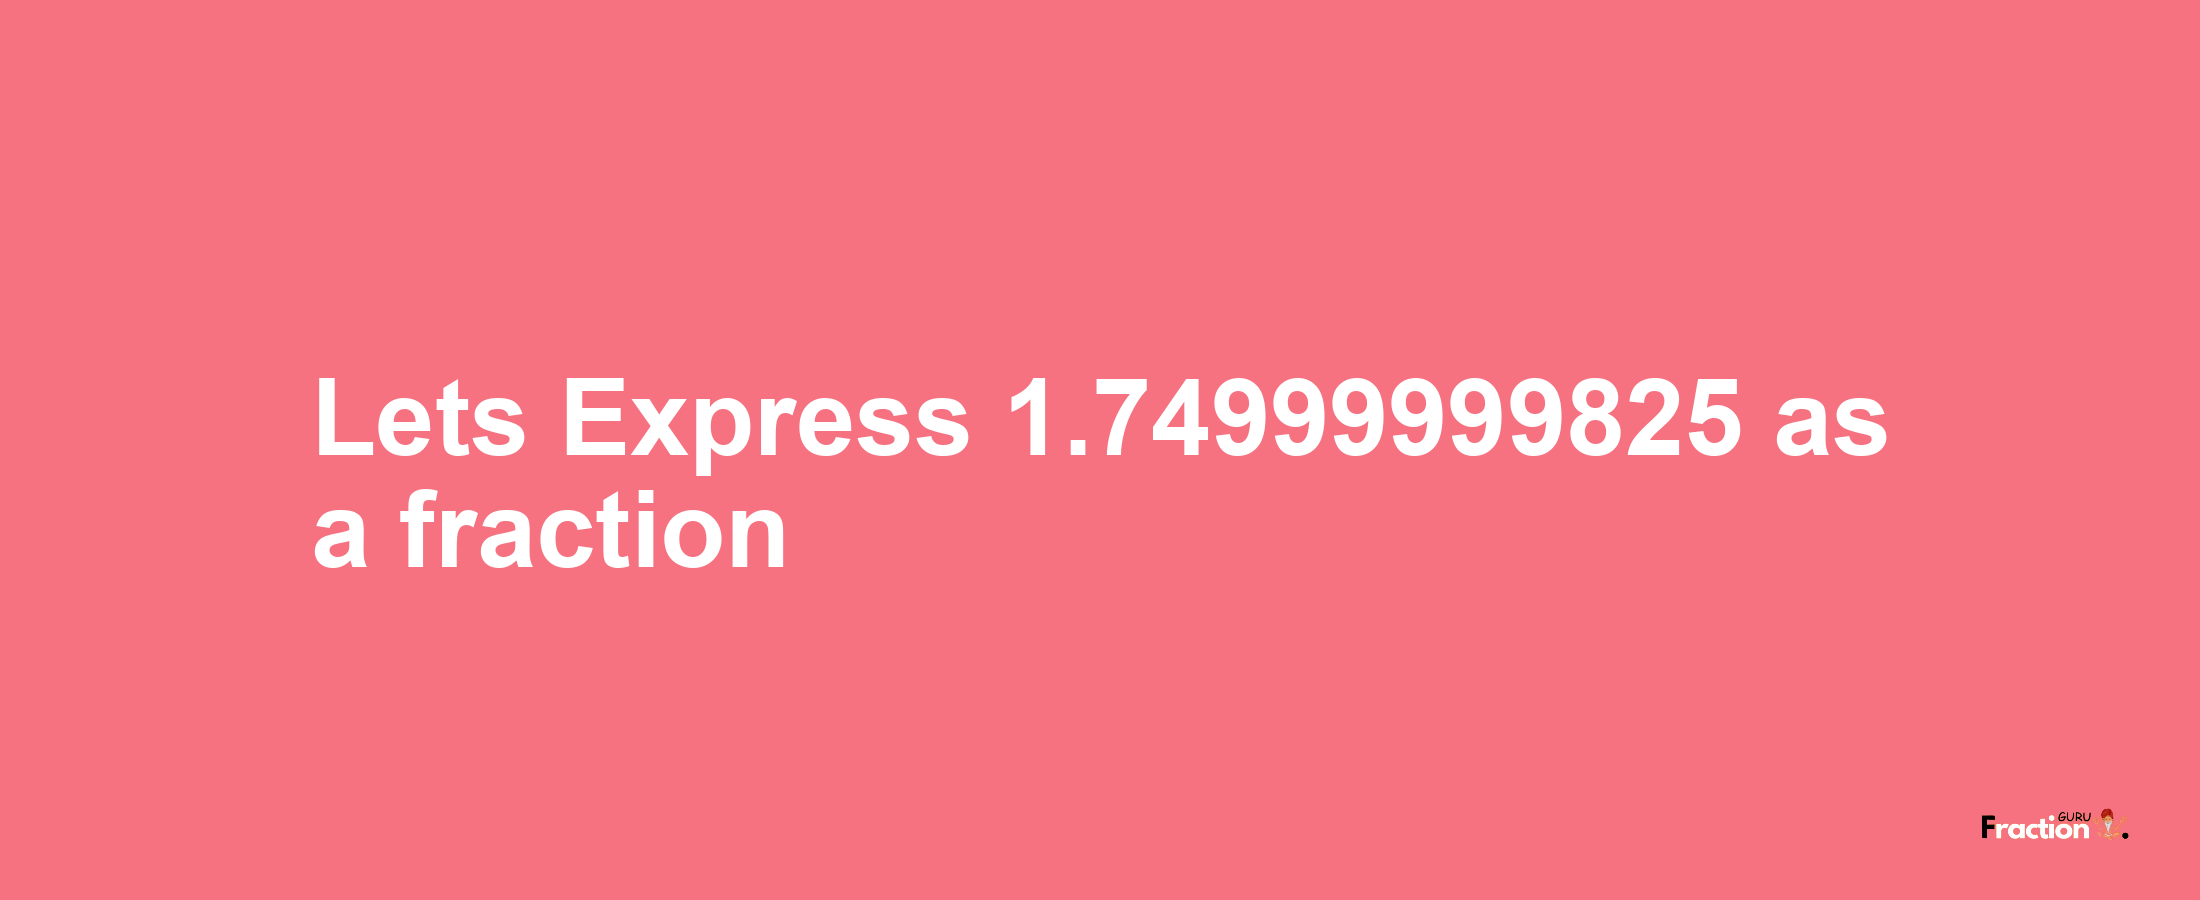 Lets Express 1.74999999825 as afraction